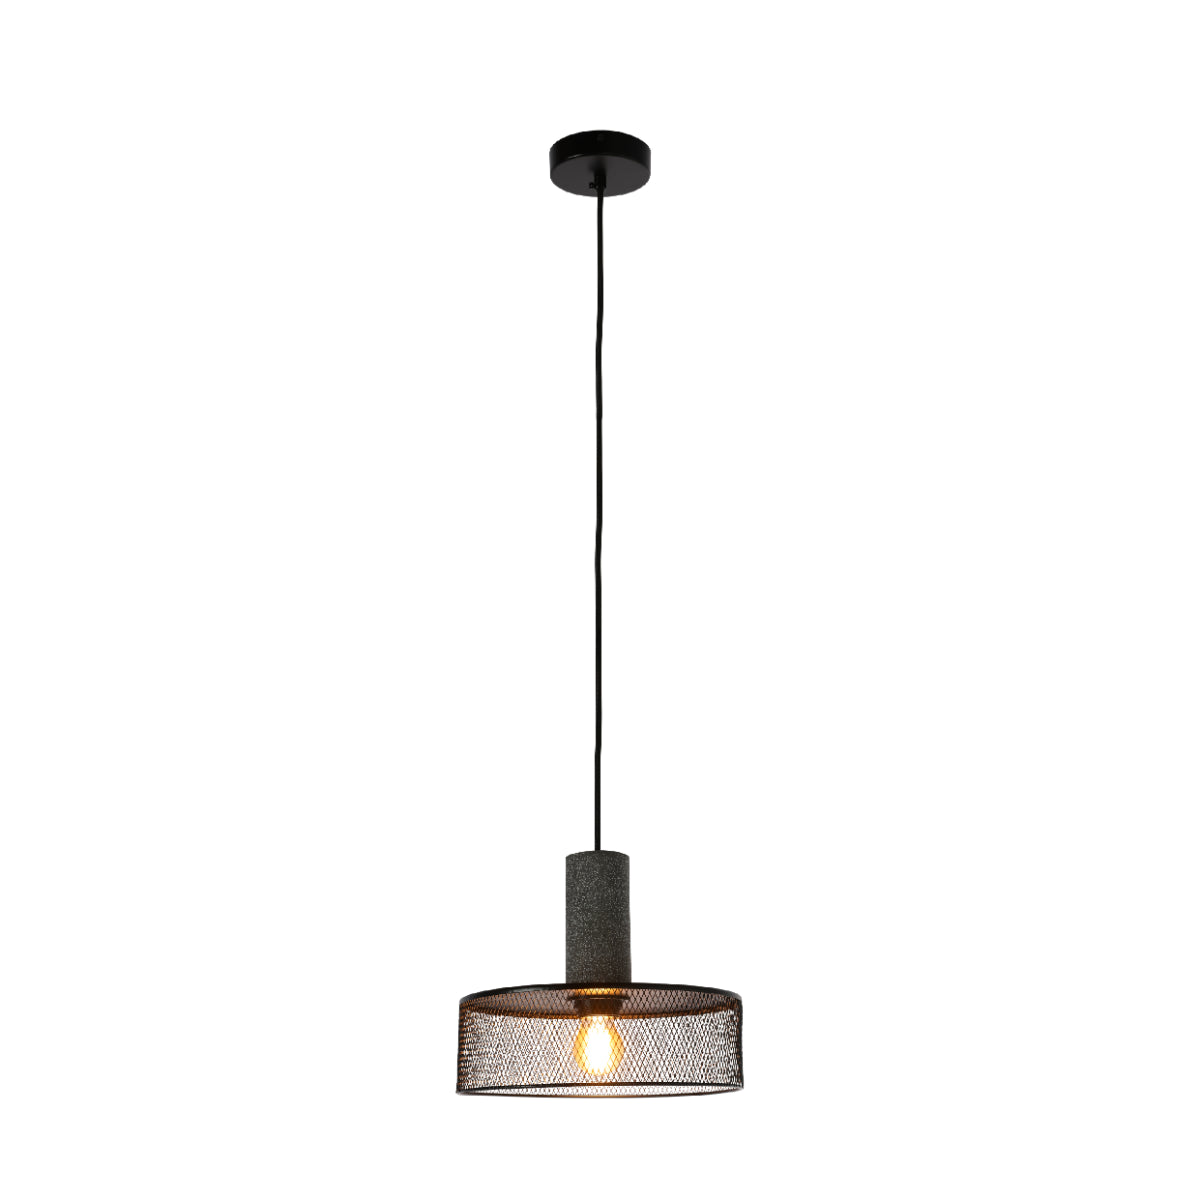 Main image of Quartet of Textured Concrete Pendant Lights with Metal Shades - TEKLED 150-19054